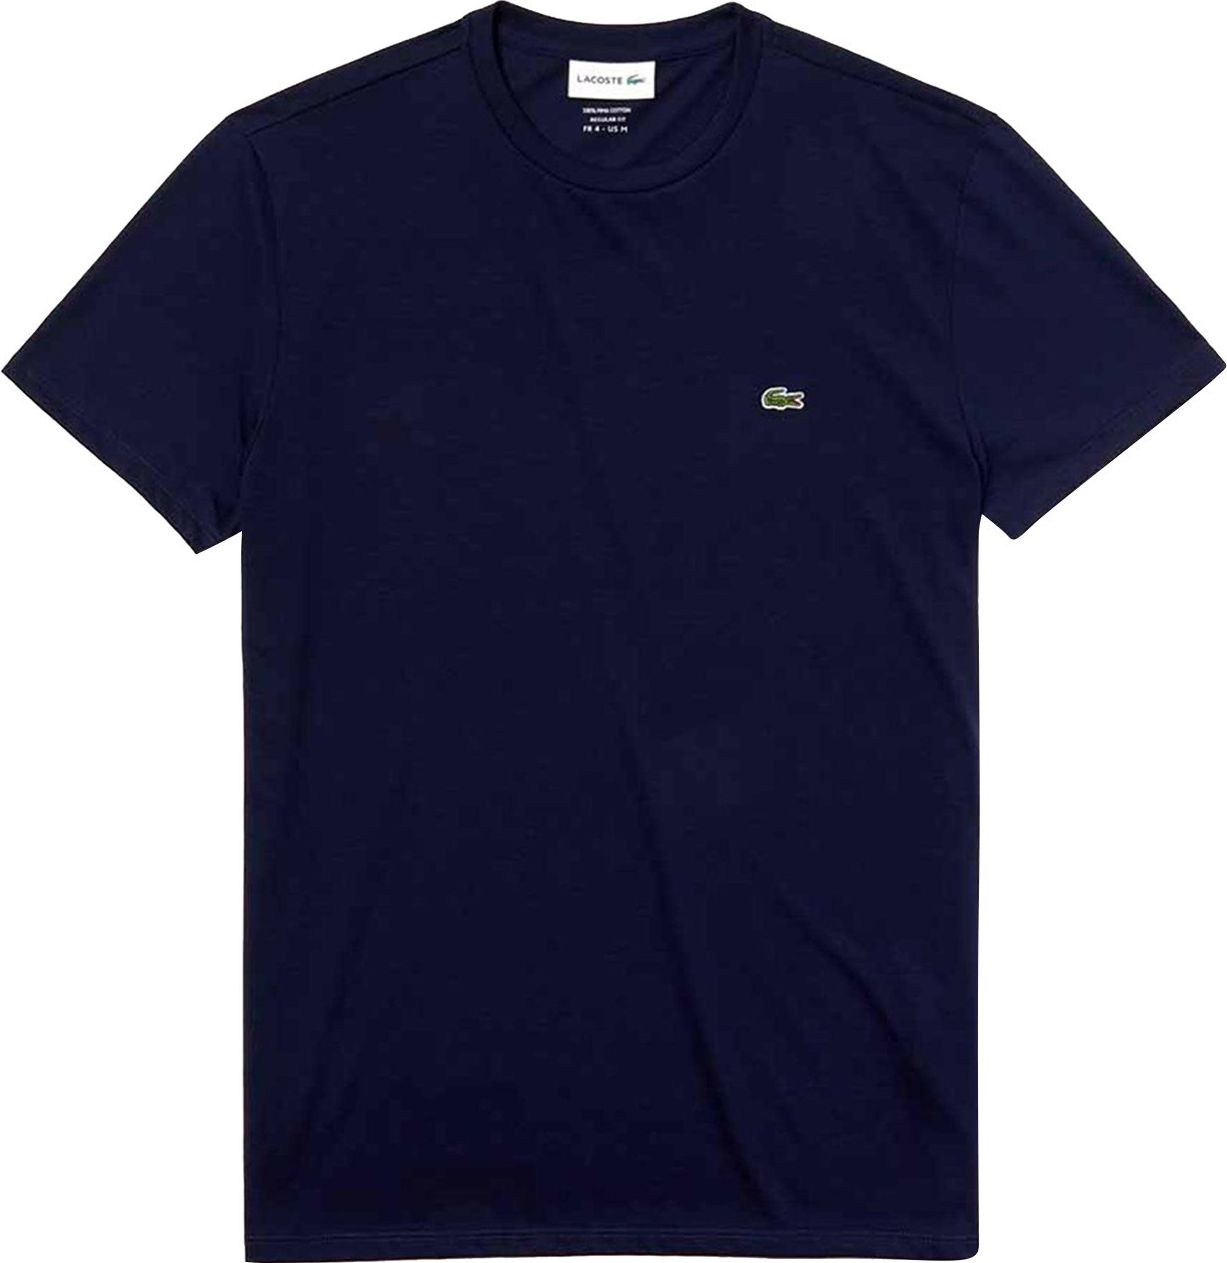 Lacoste T-shirt Donkerblauw Blue